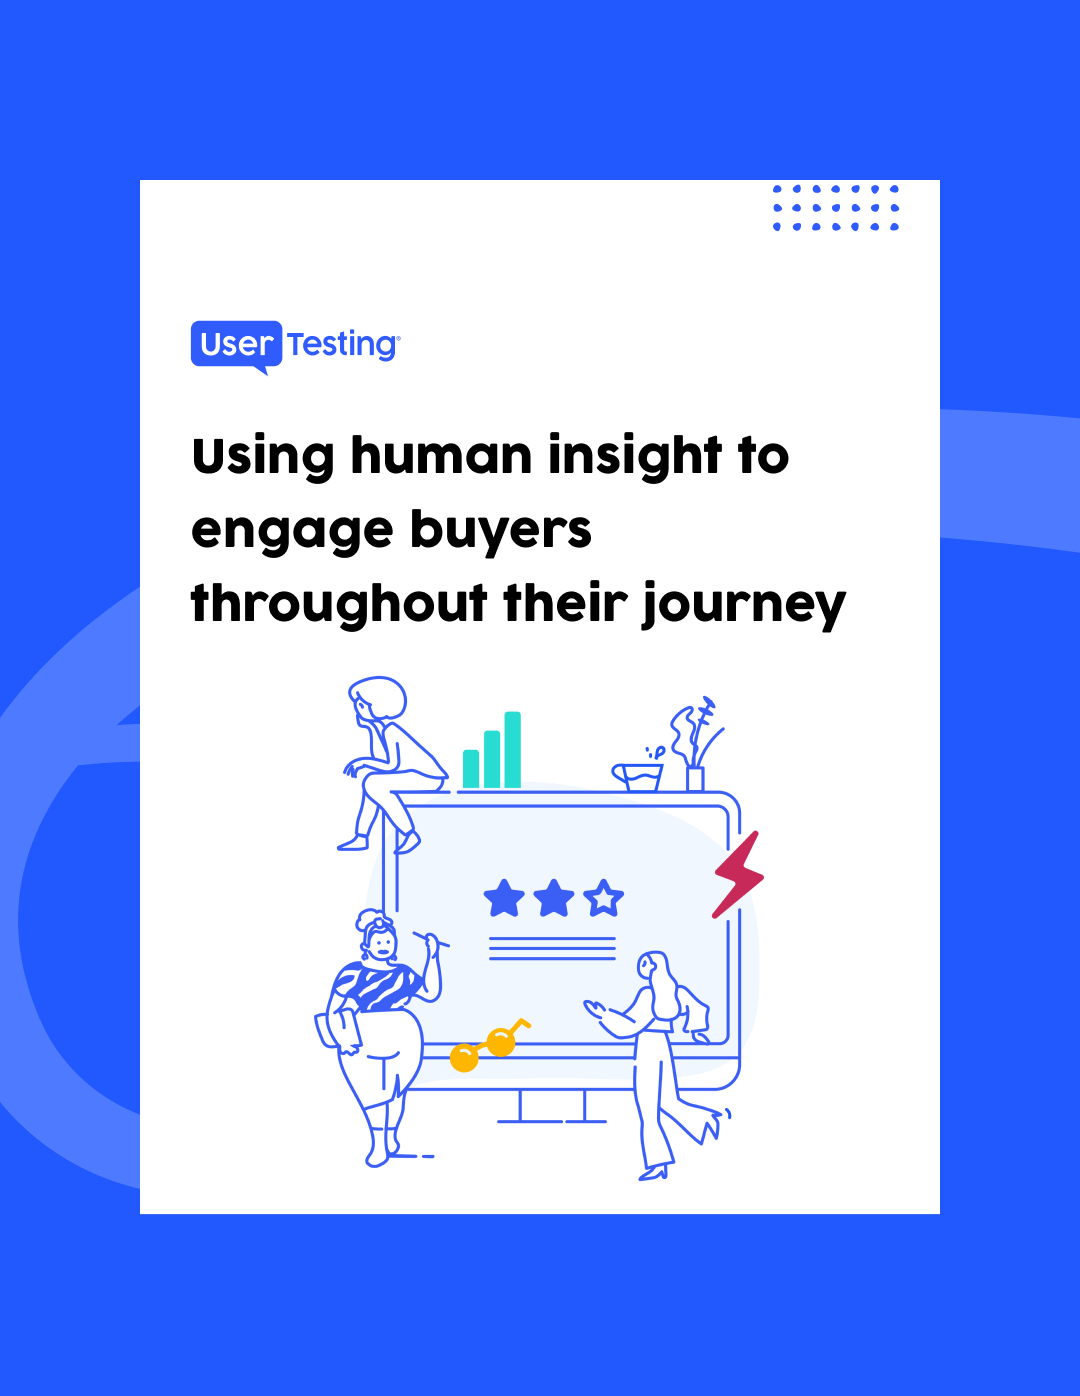 UserTesting guide using human insight to engage buyers